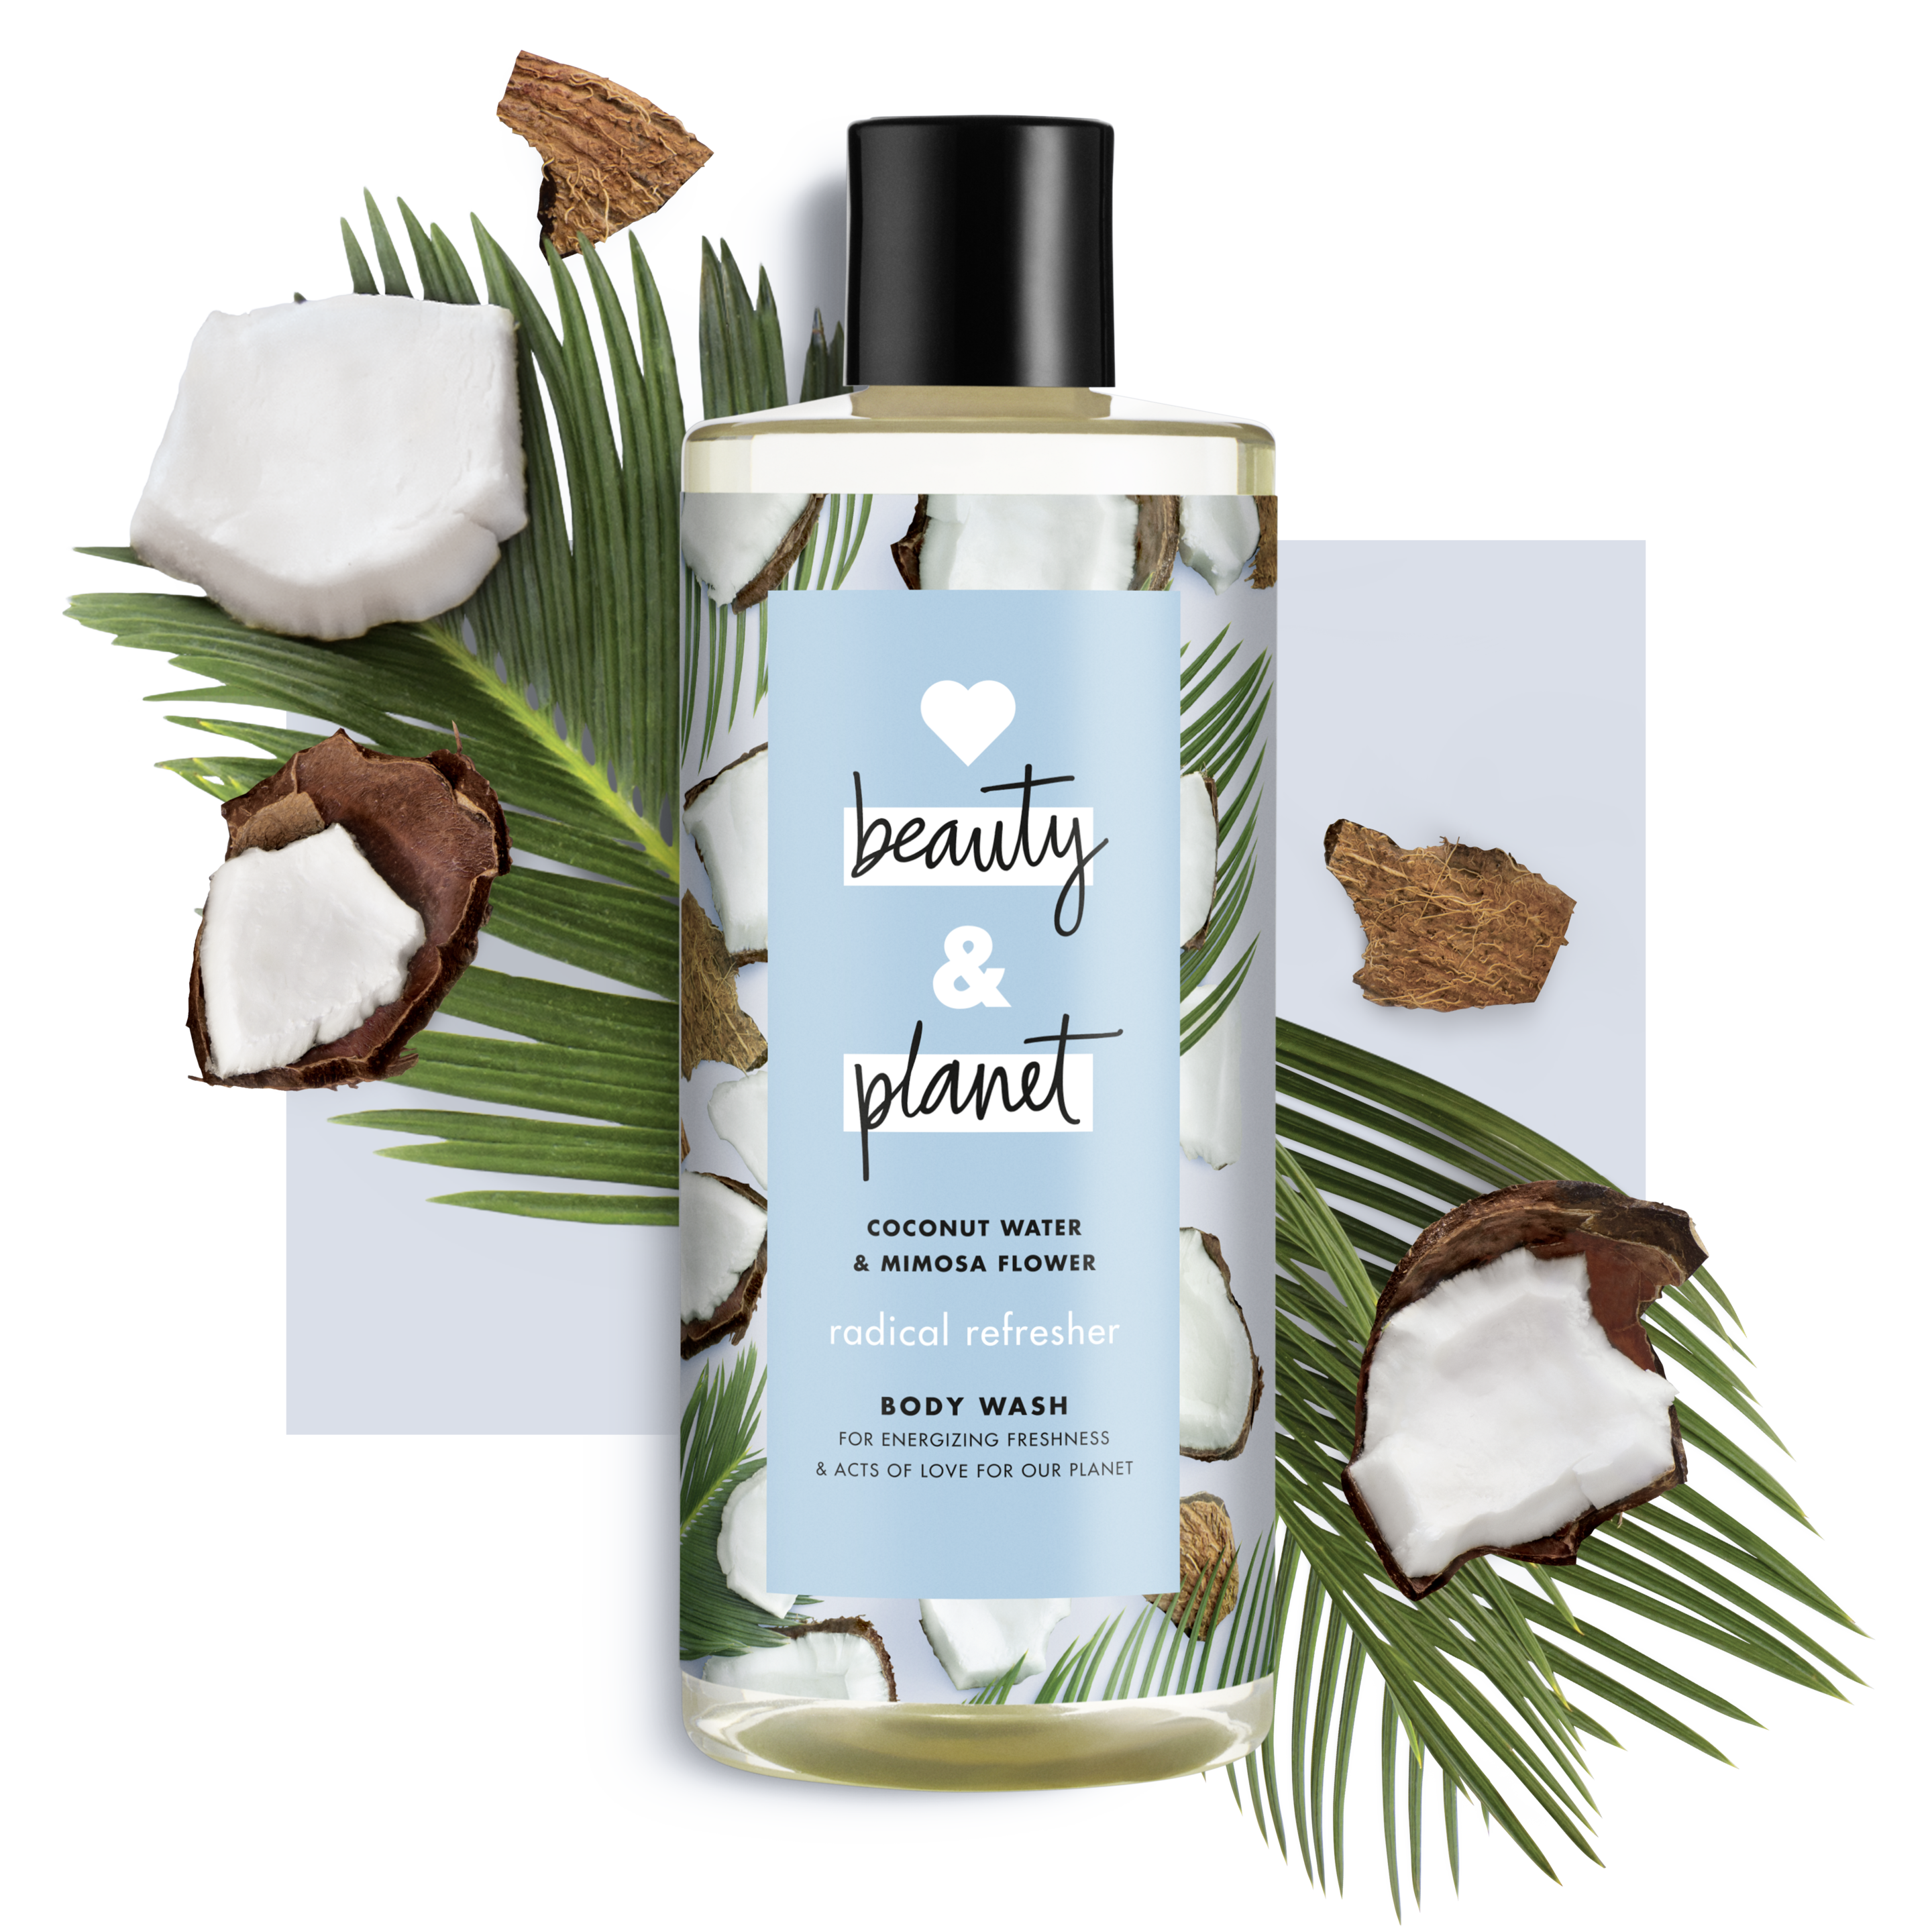 Front of body wash pack Love Beauty Planet Coconut Water & Mimosa Flower body wash Radical Refresher 500ml